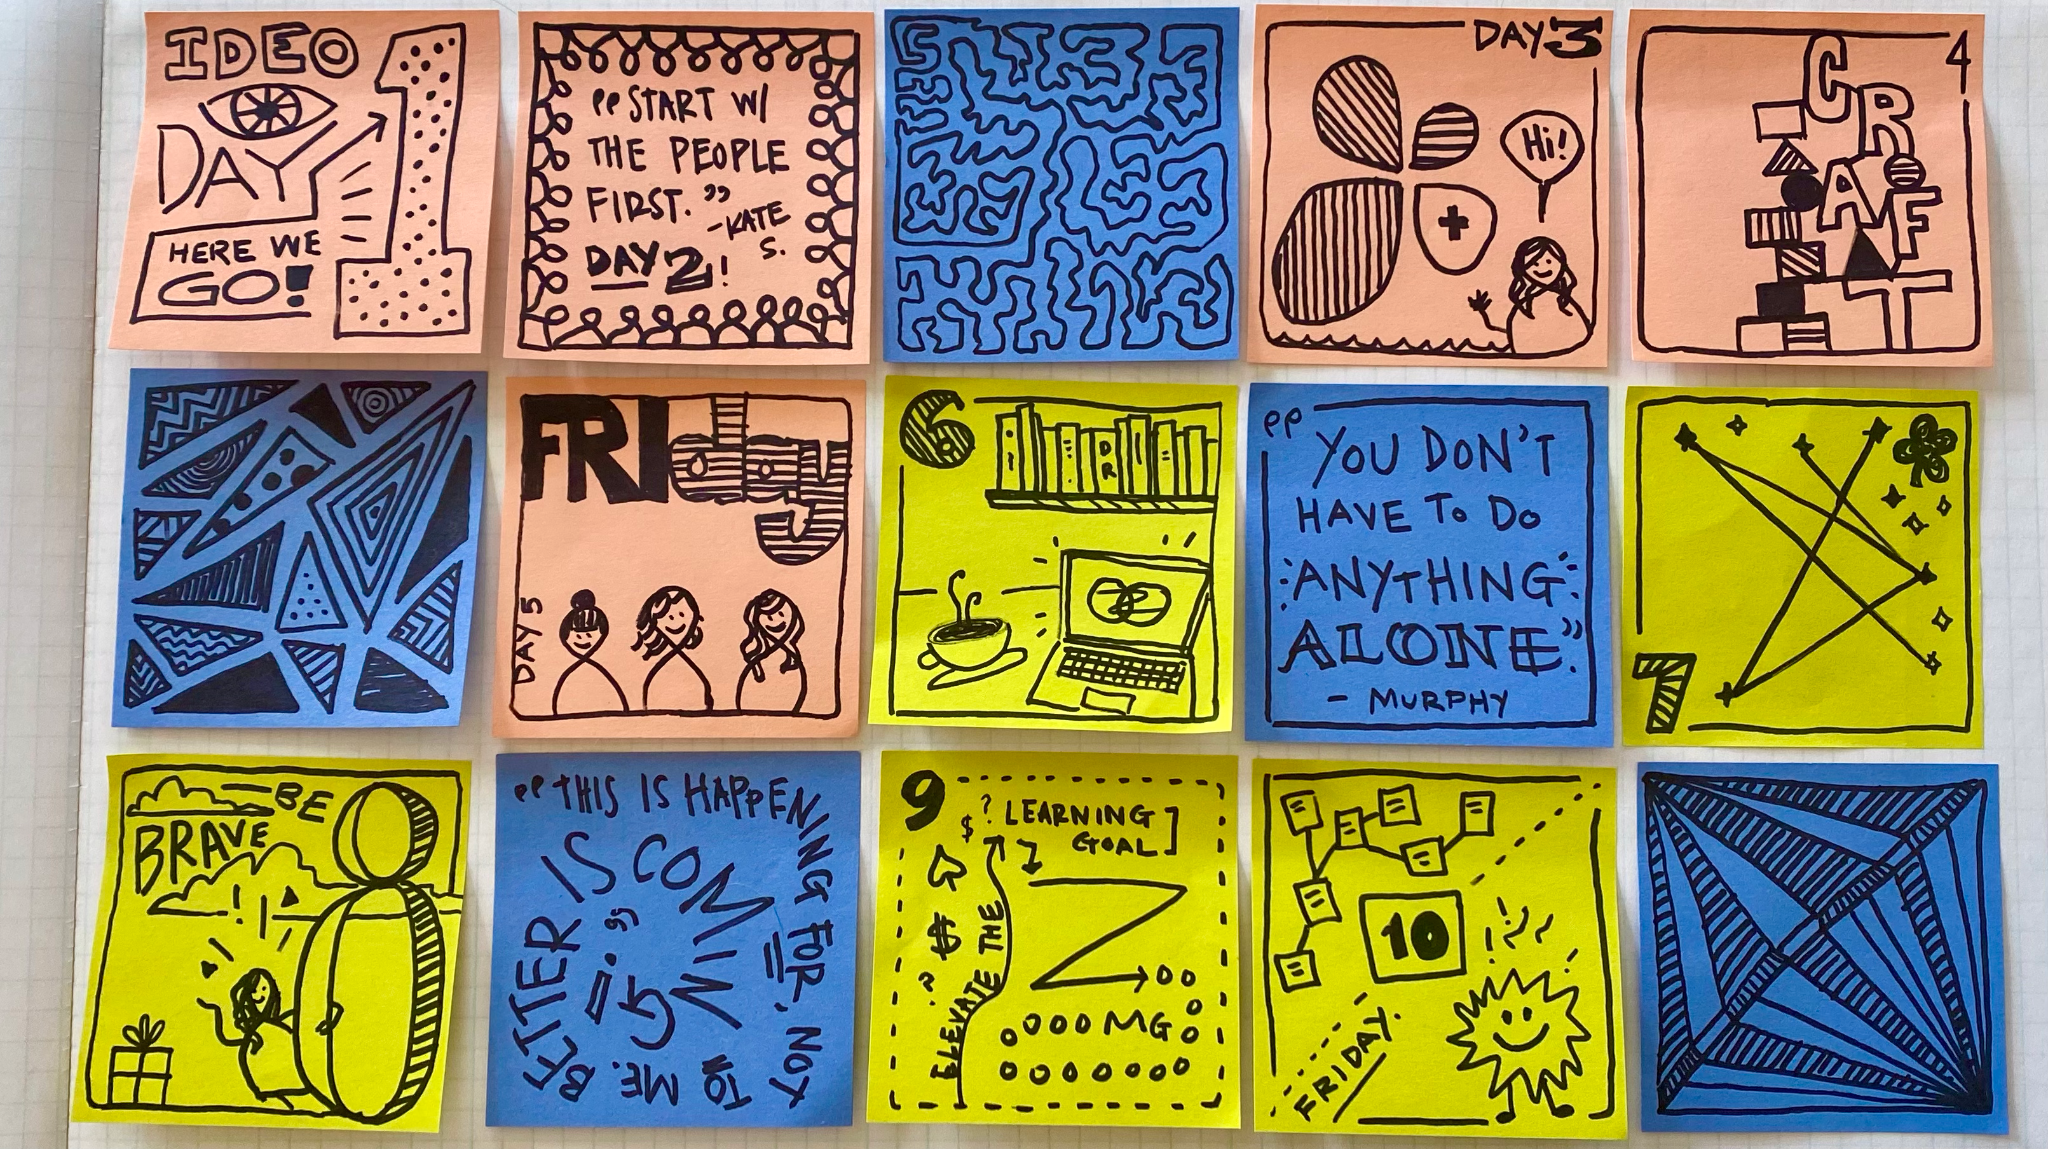 A grid of Post-it notes with drawings on them.